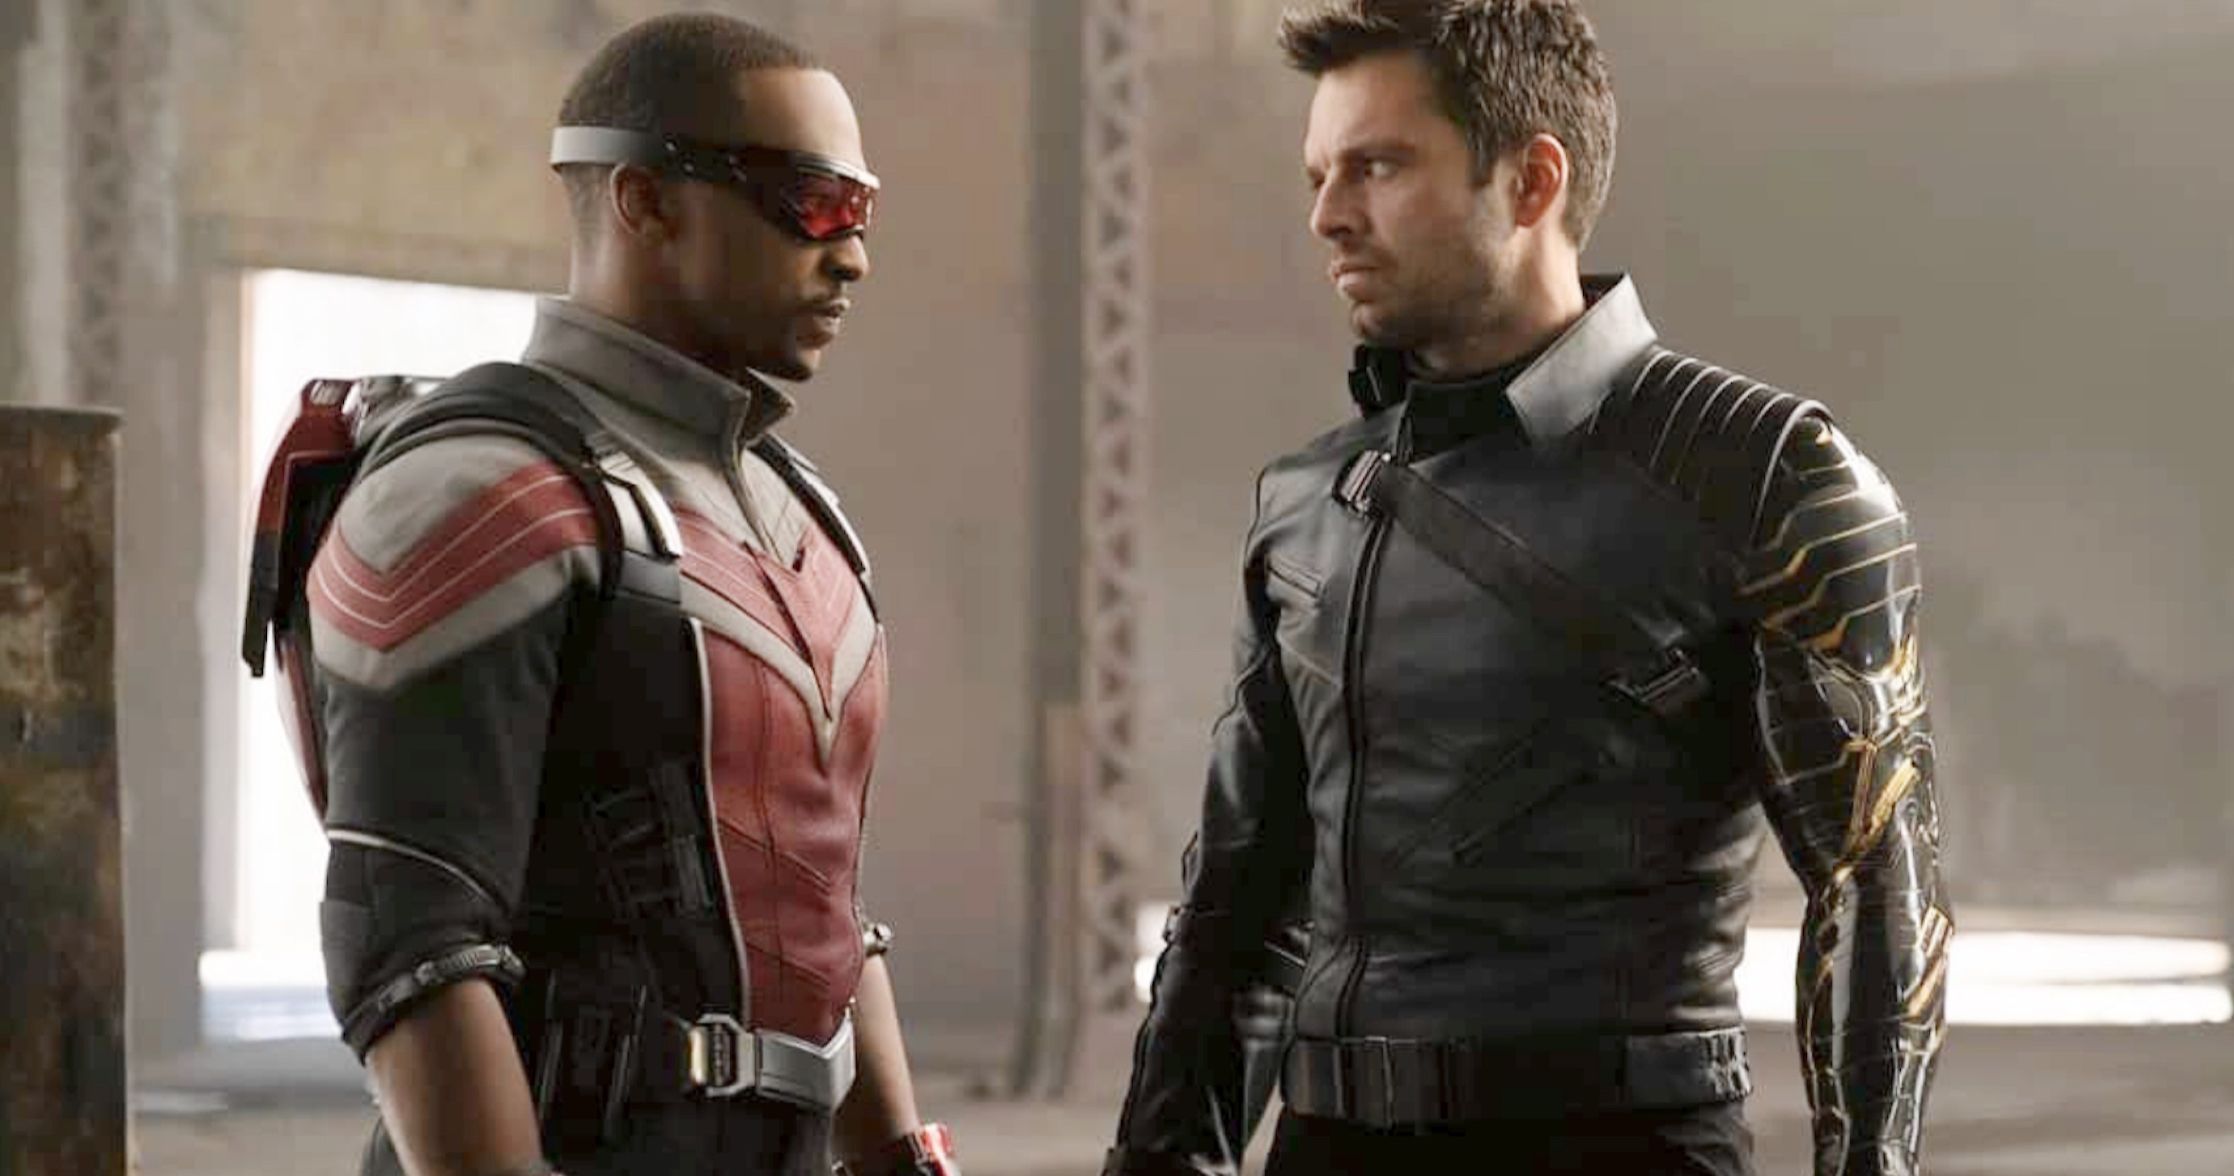 The Falcon and the Winter Soldier Trailer Breaks Super Bowl Viewing Records